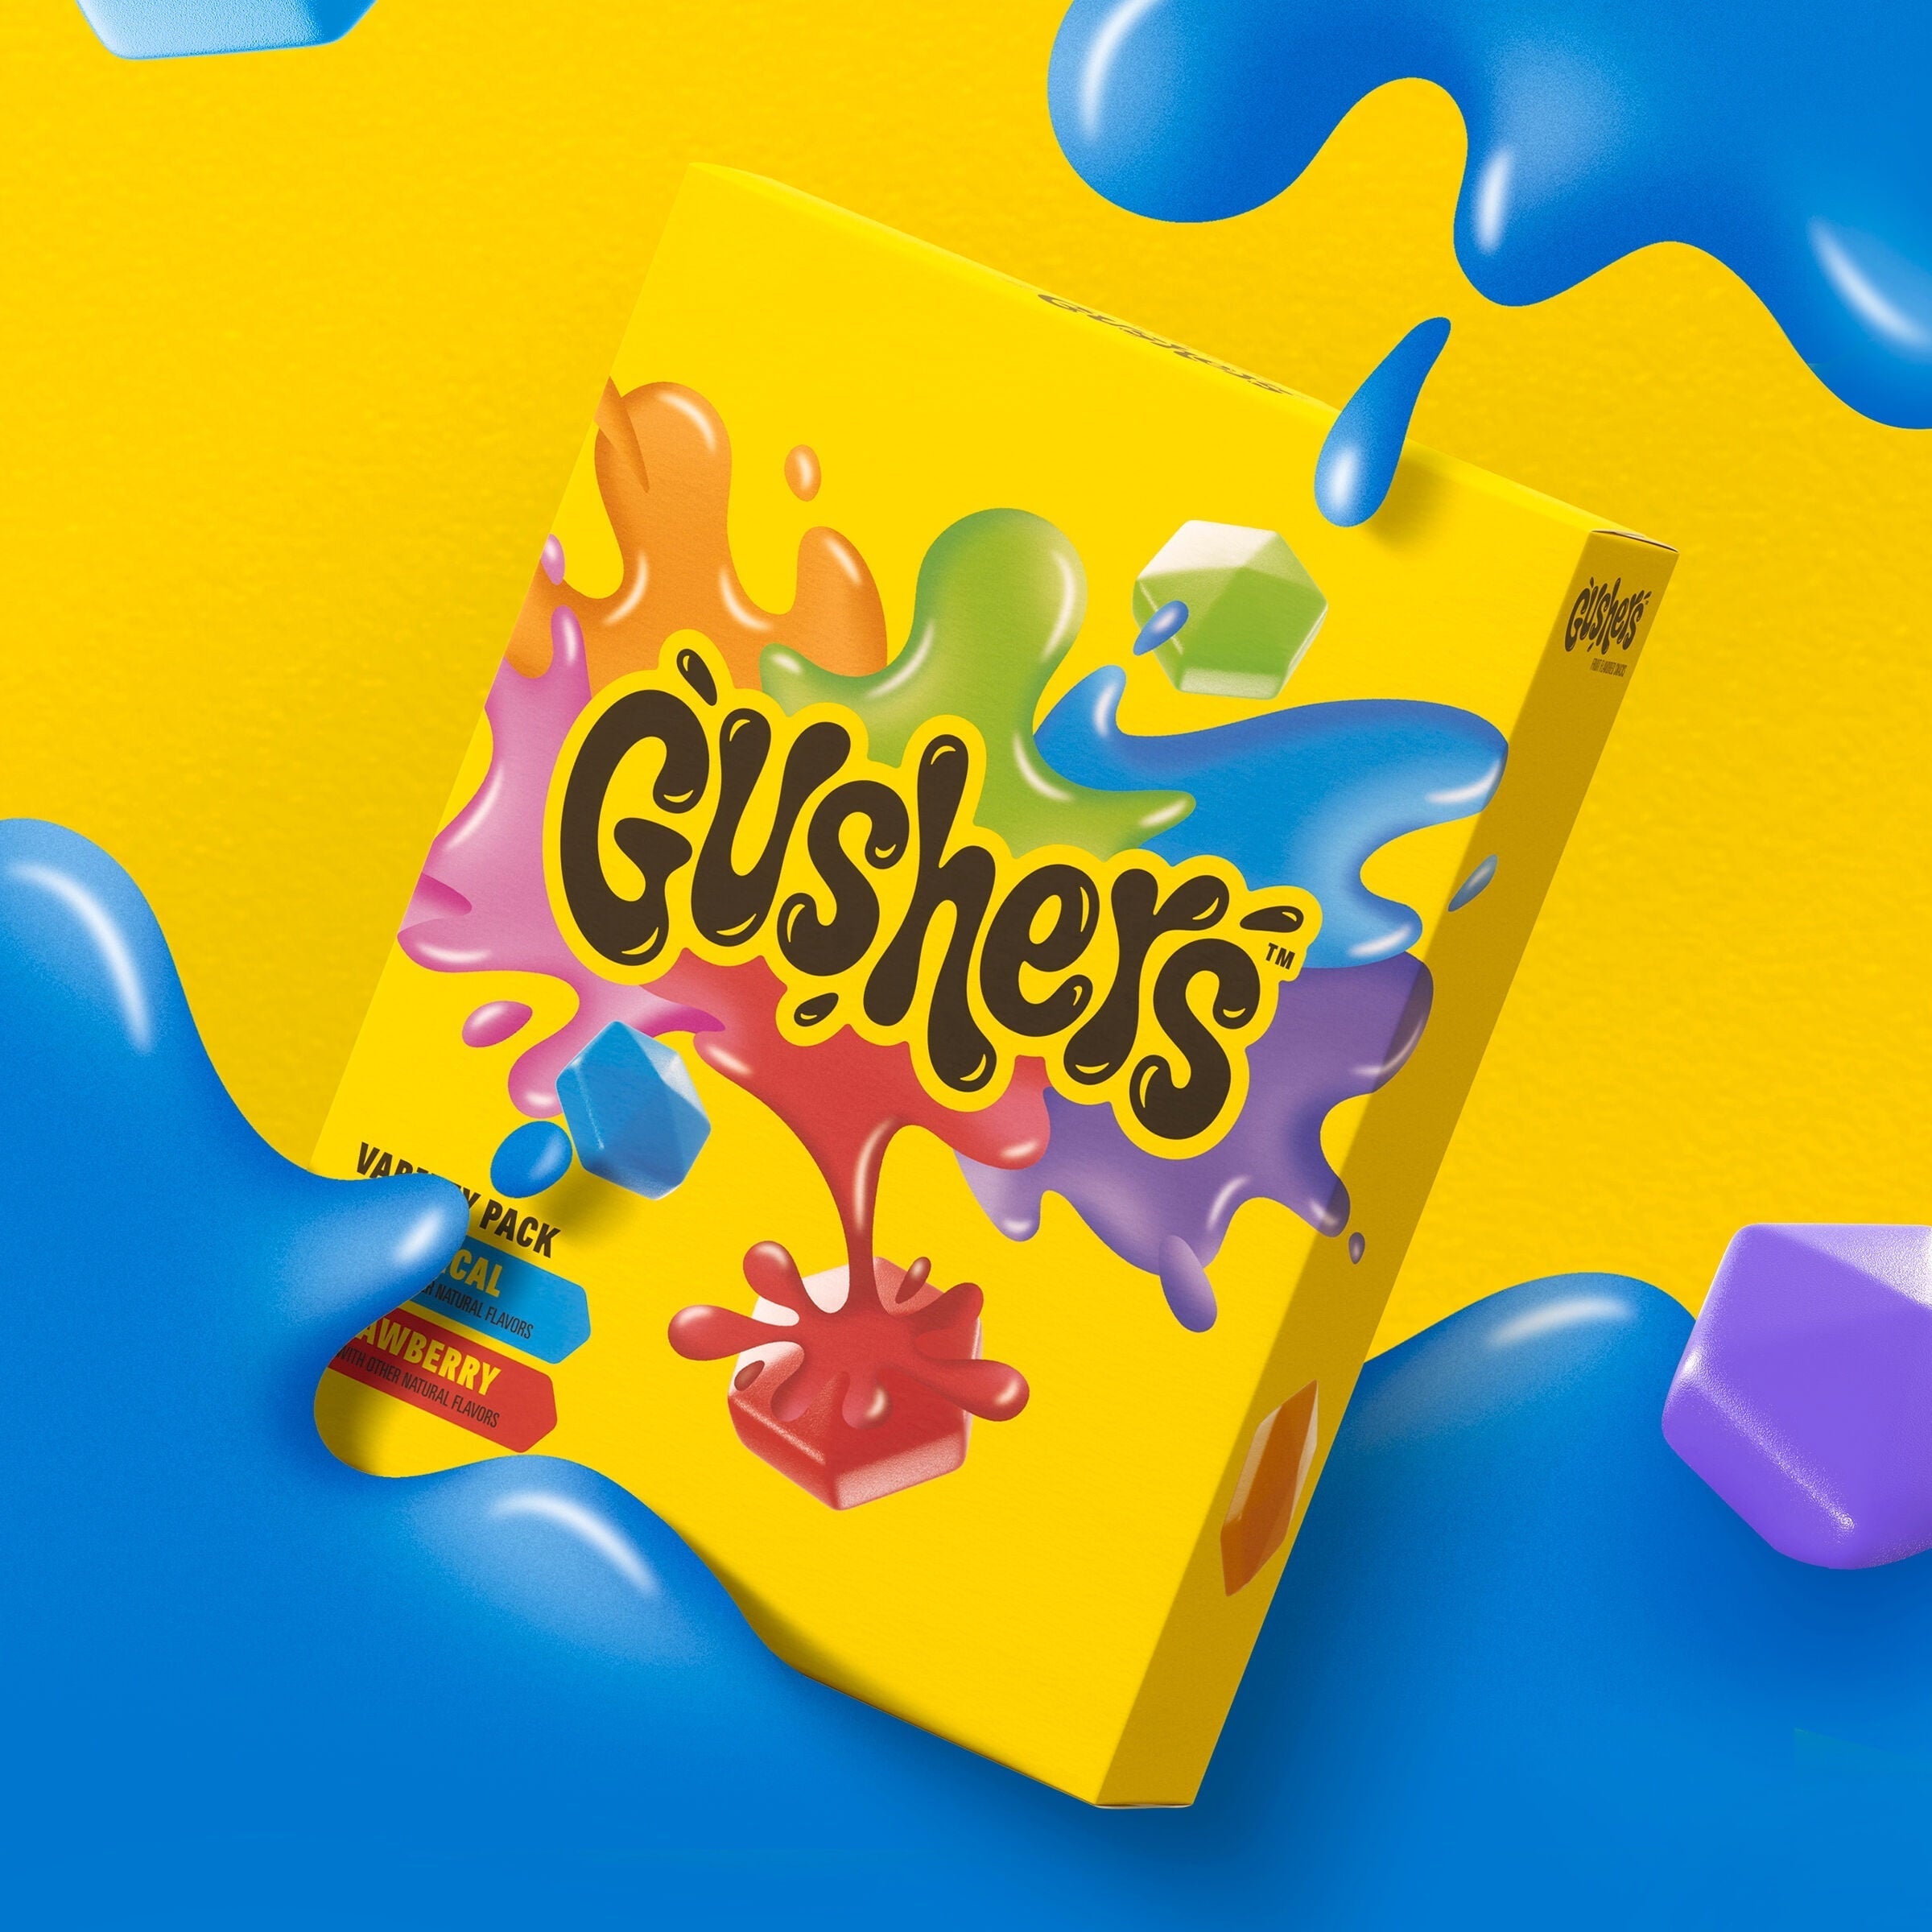 Wholesale prices with free shipping all over United States Gushers Fruit Flavored Snacks, Variety Pack, Strawberry and Tropical, 20 ct - Steven Deals